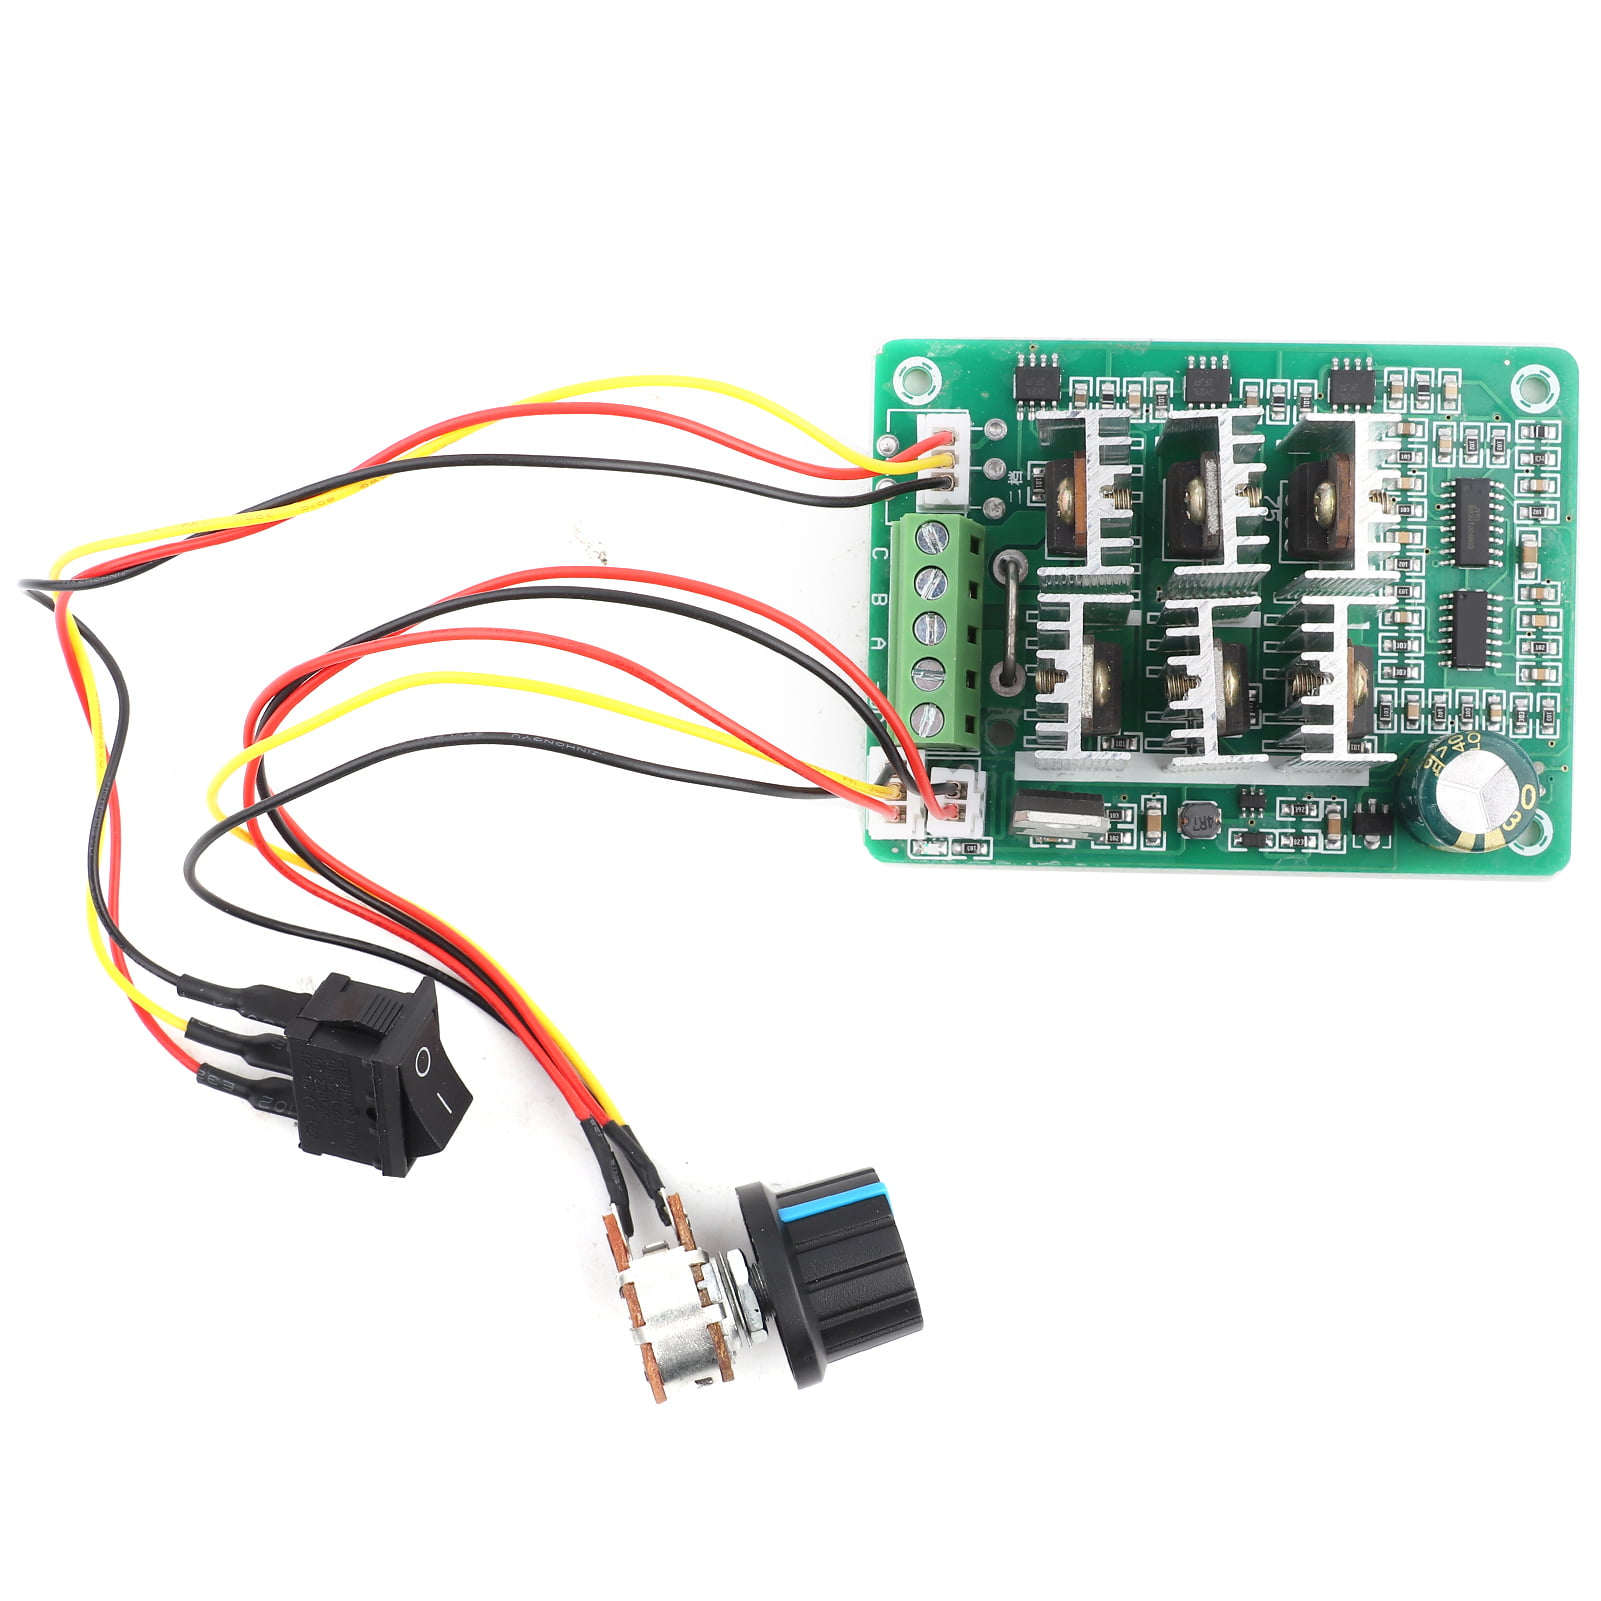 PWM DC Brushless Motor Driver DC 5V-12V 3-Phase Speed Controller CW CCW Switch 